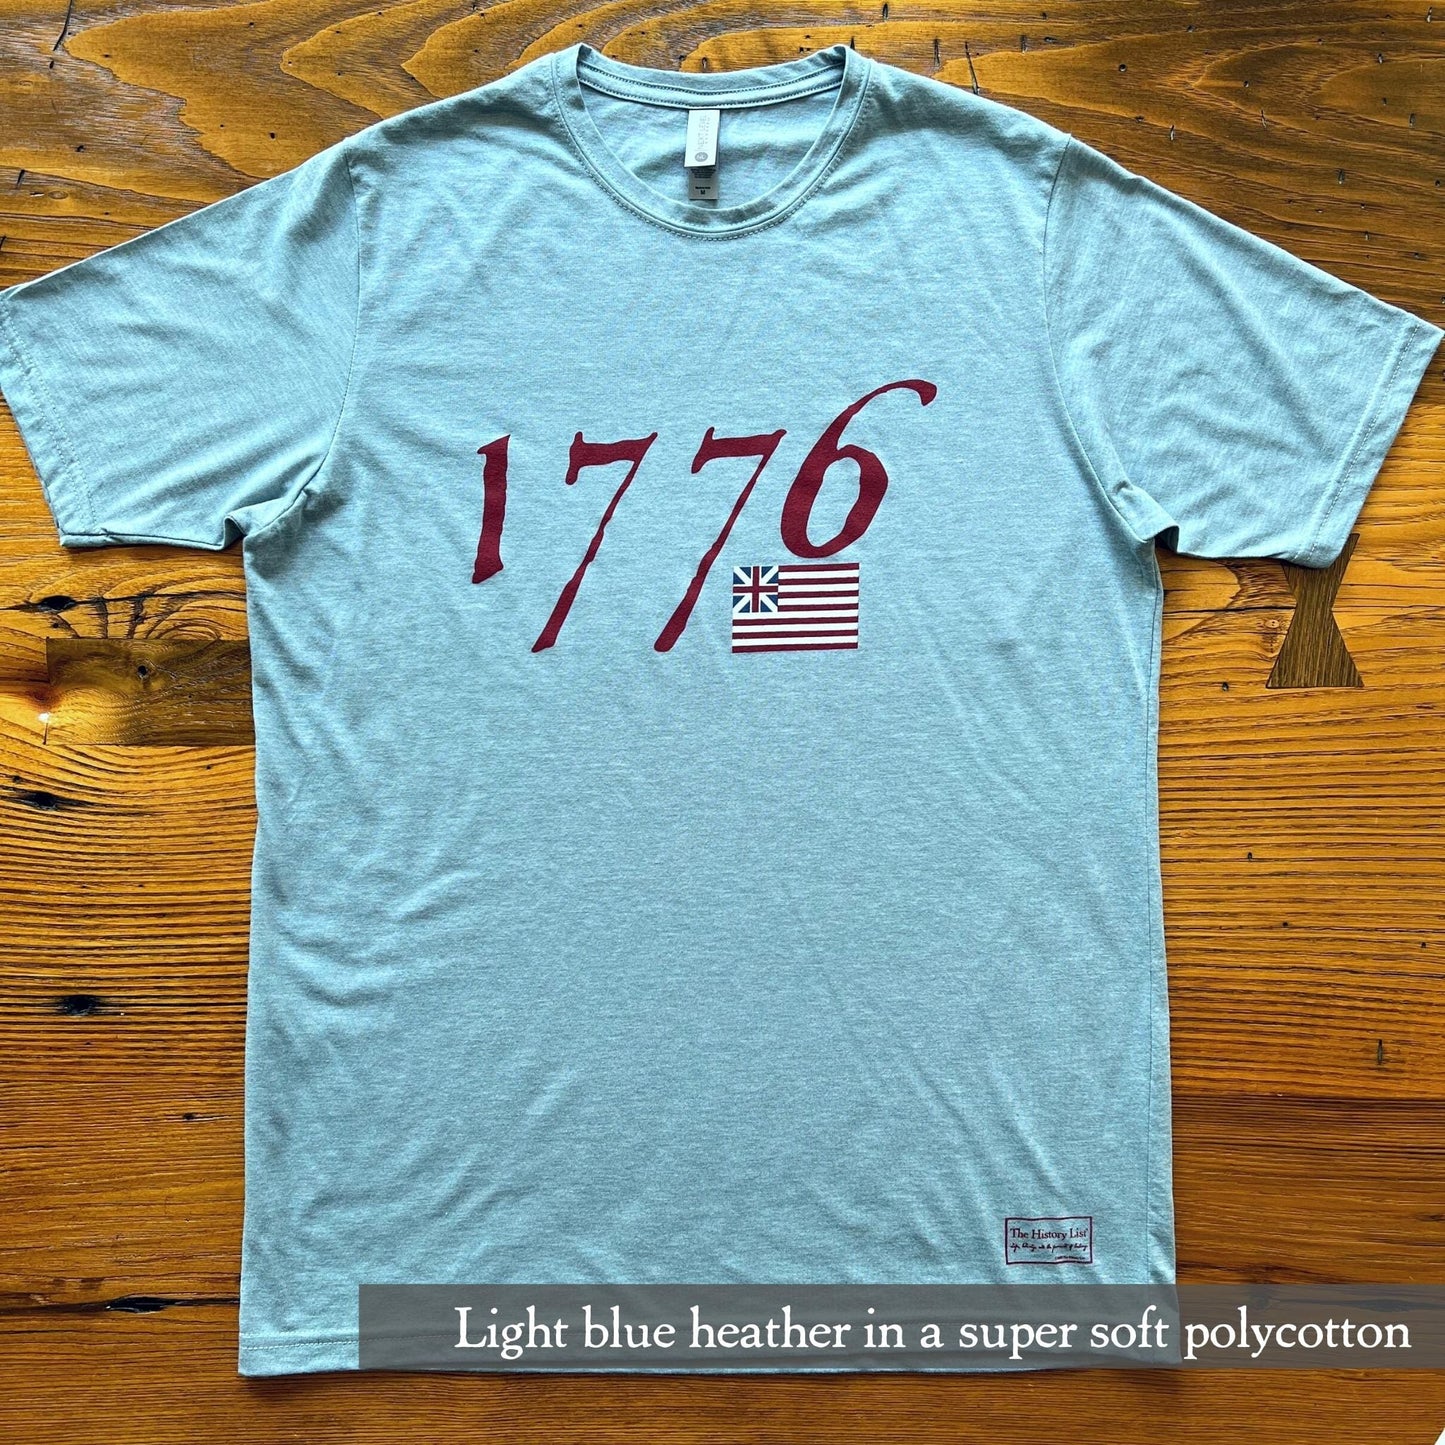 "We hold these truths - July 4, 1776” T-shirt from The History List store in Light blue heather